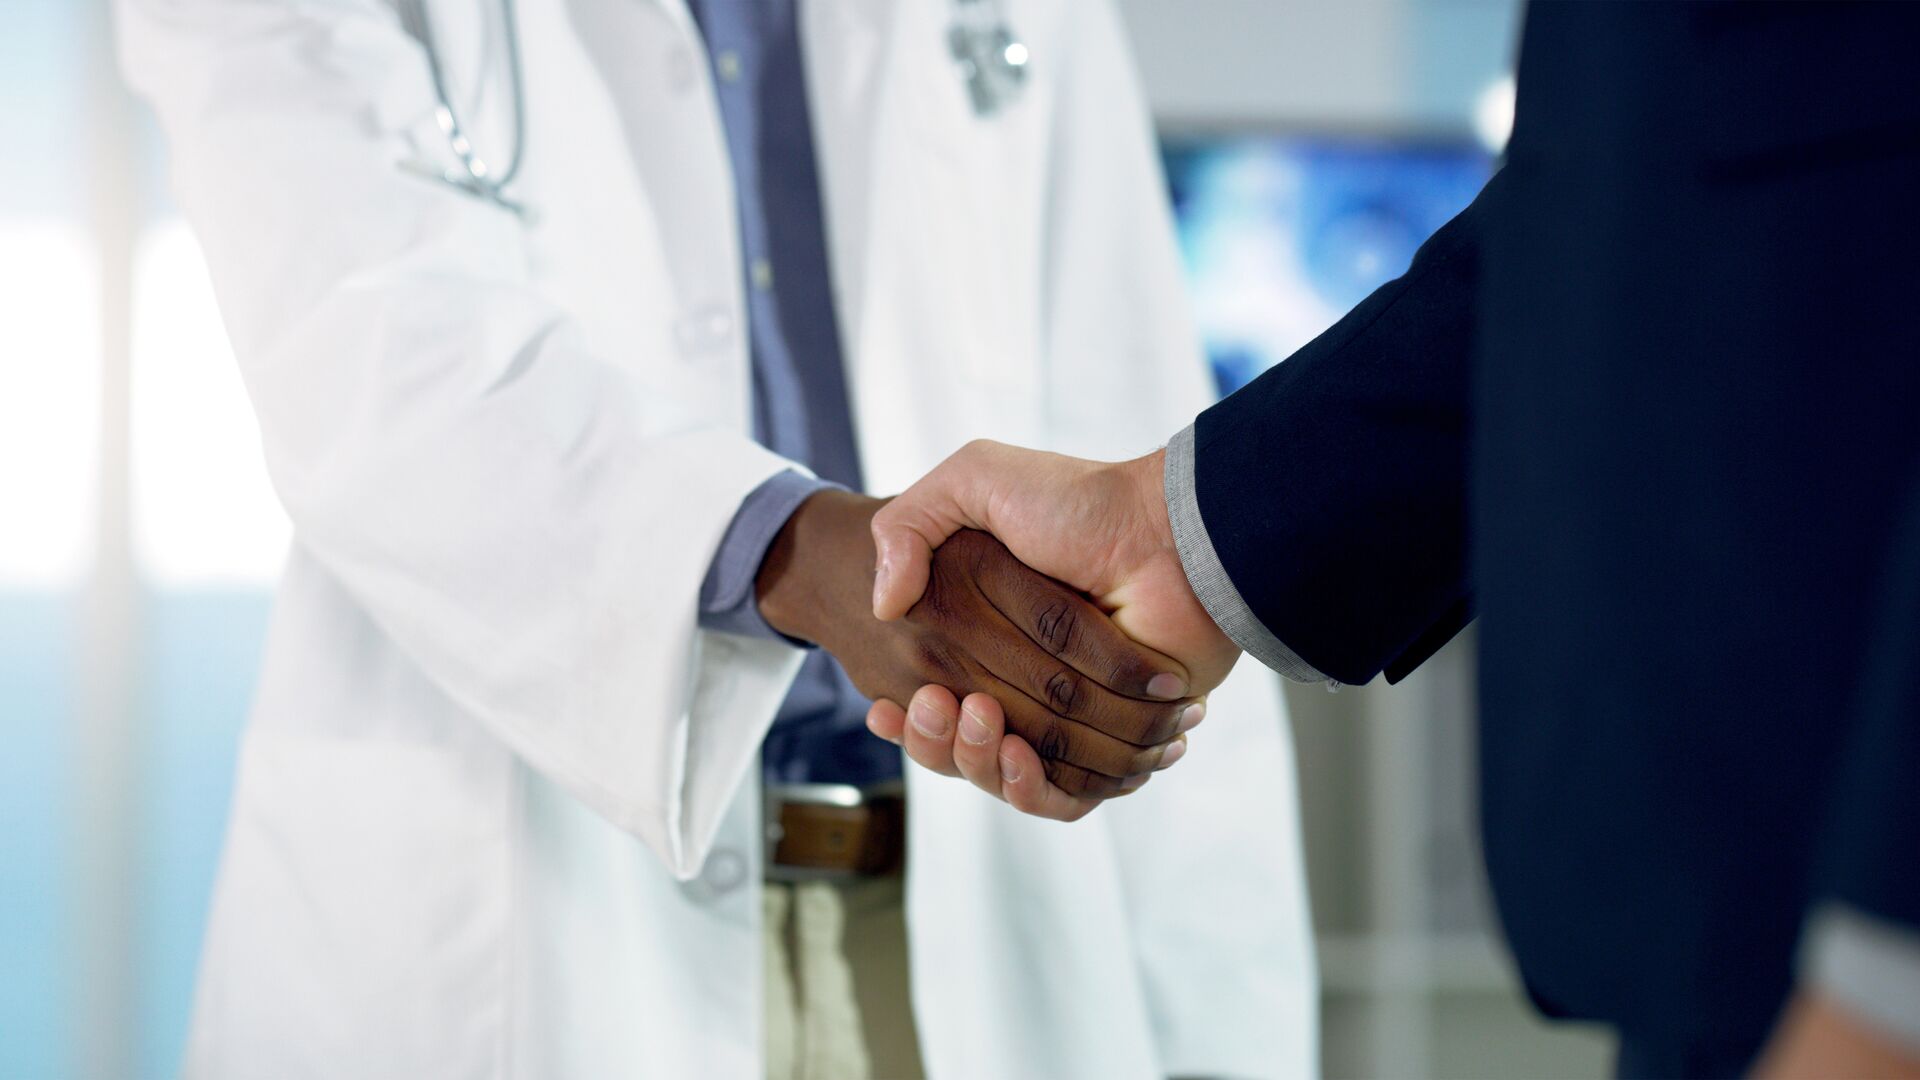 A doctor and somebody in business making a deal, representative of deal making in the biotech industry.